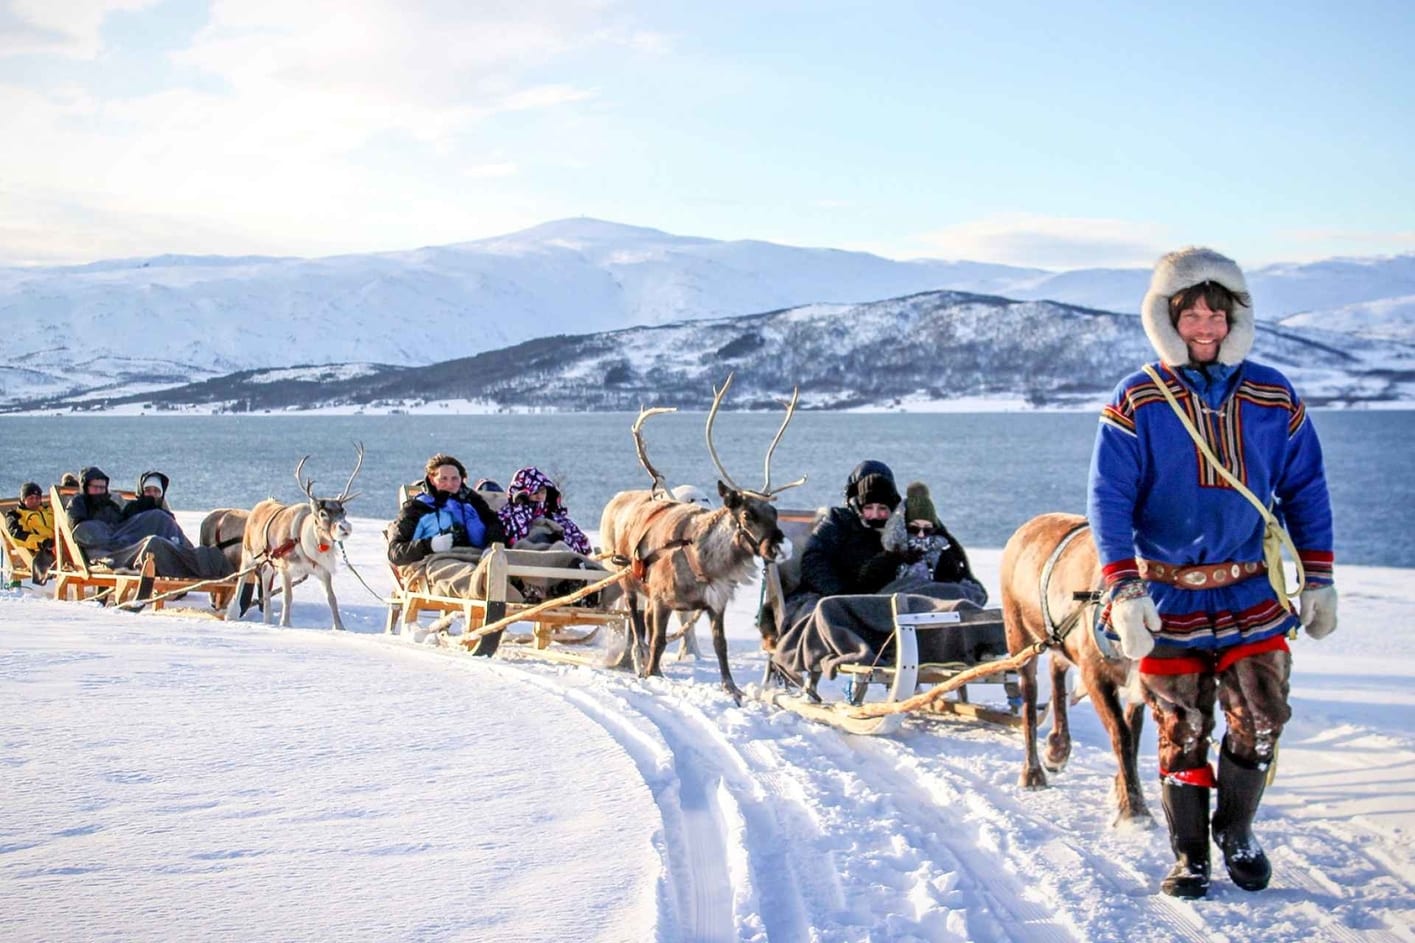 Tromso Arctic reindeer, sledding, and Sami culture tour, a festive thing to do for Christmas in Tromso and in Tromso in winter